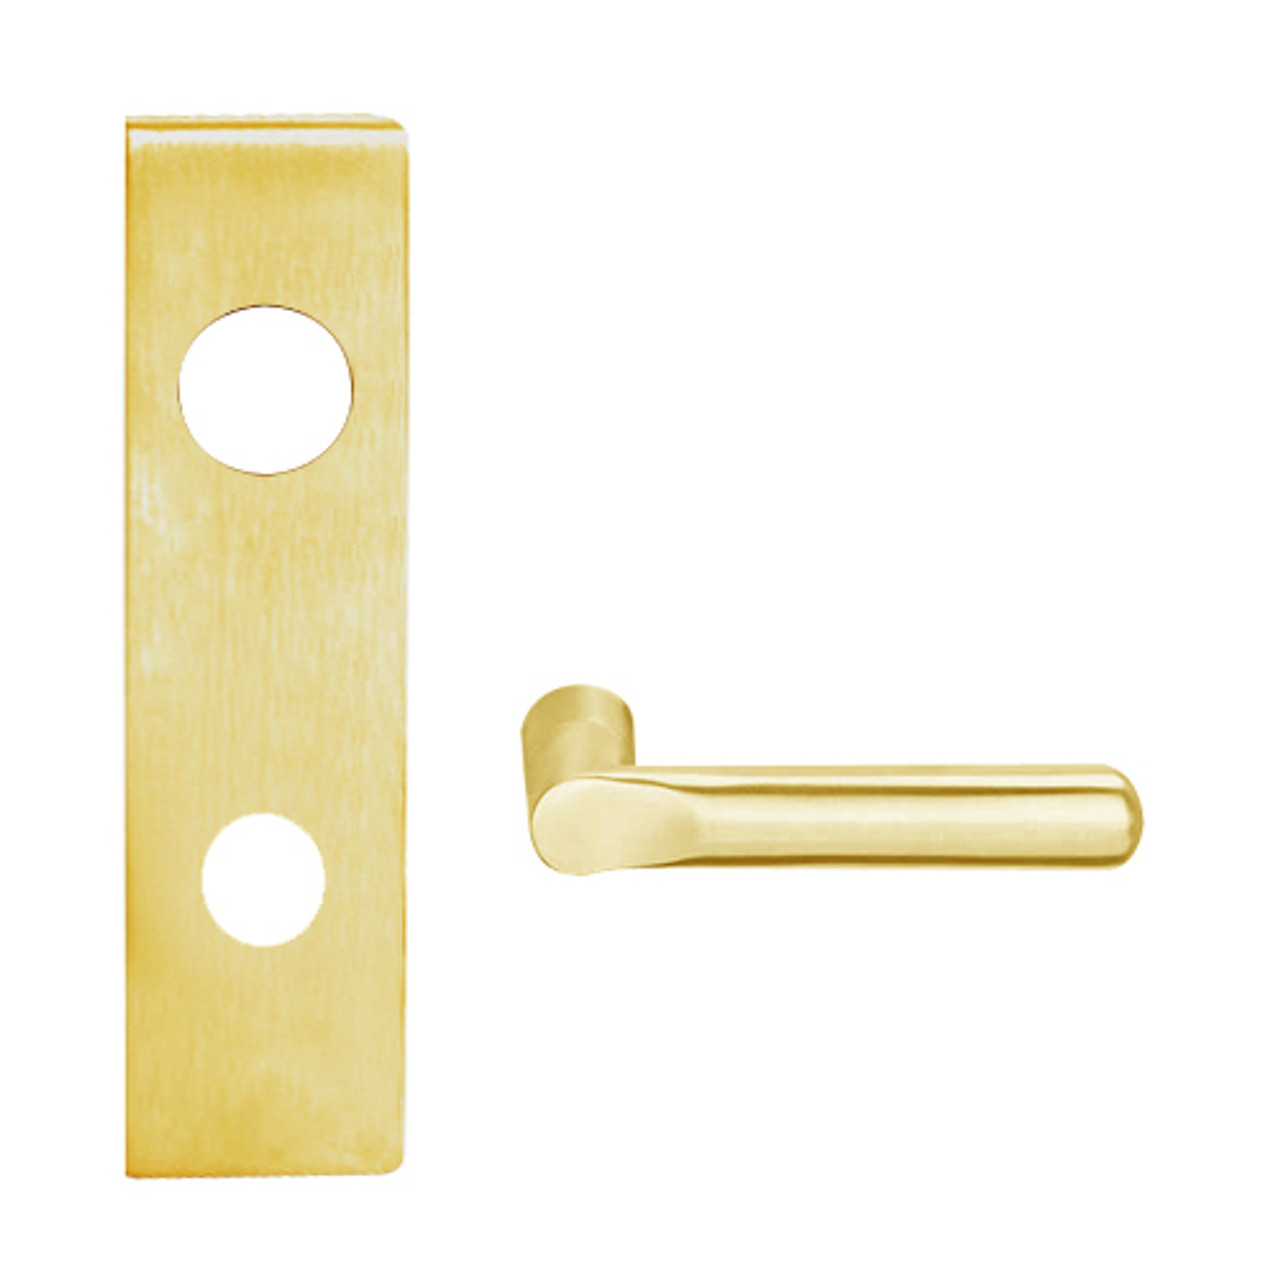 L9050J-18N-605 Schlage L Series Entrance Commercial Mortise Lock with 18 Cast Lever Design Prepped for FSIC in Bright Brass